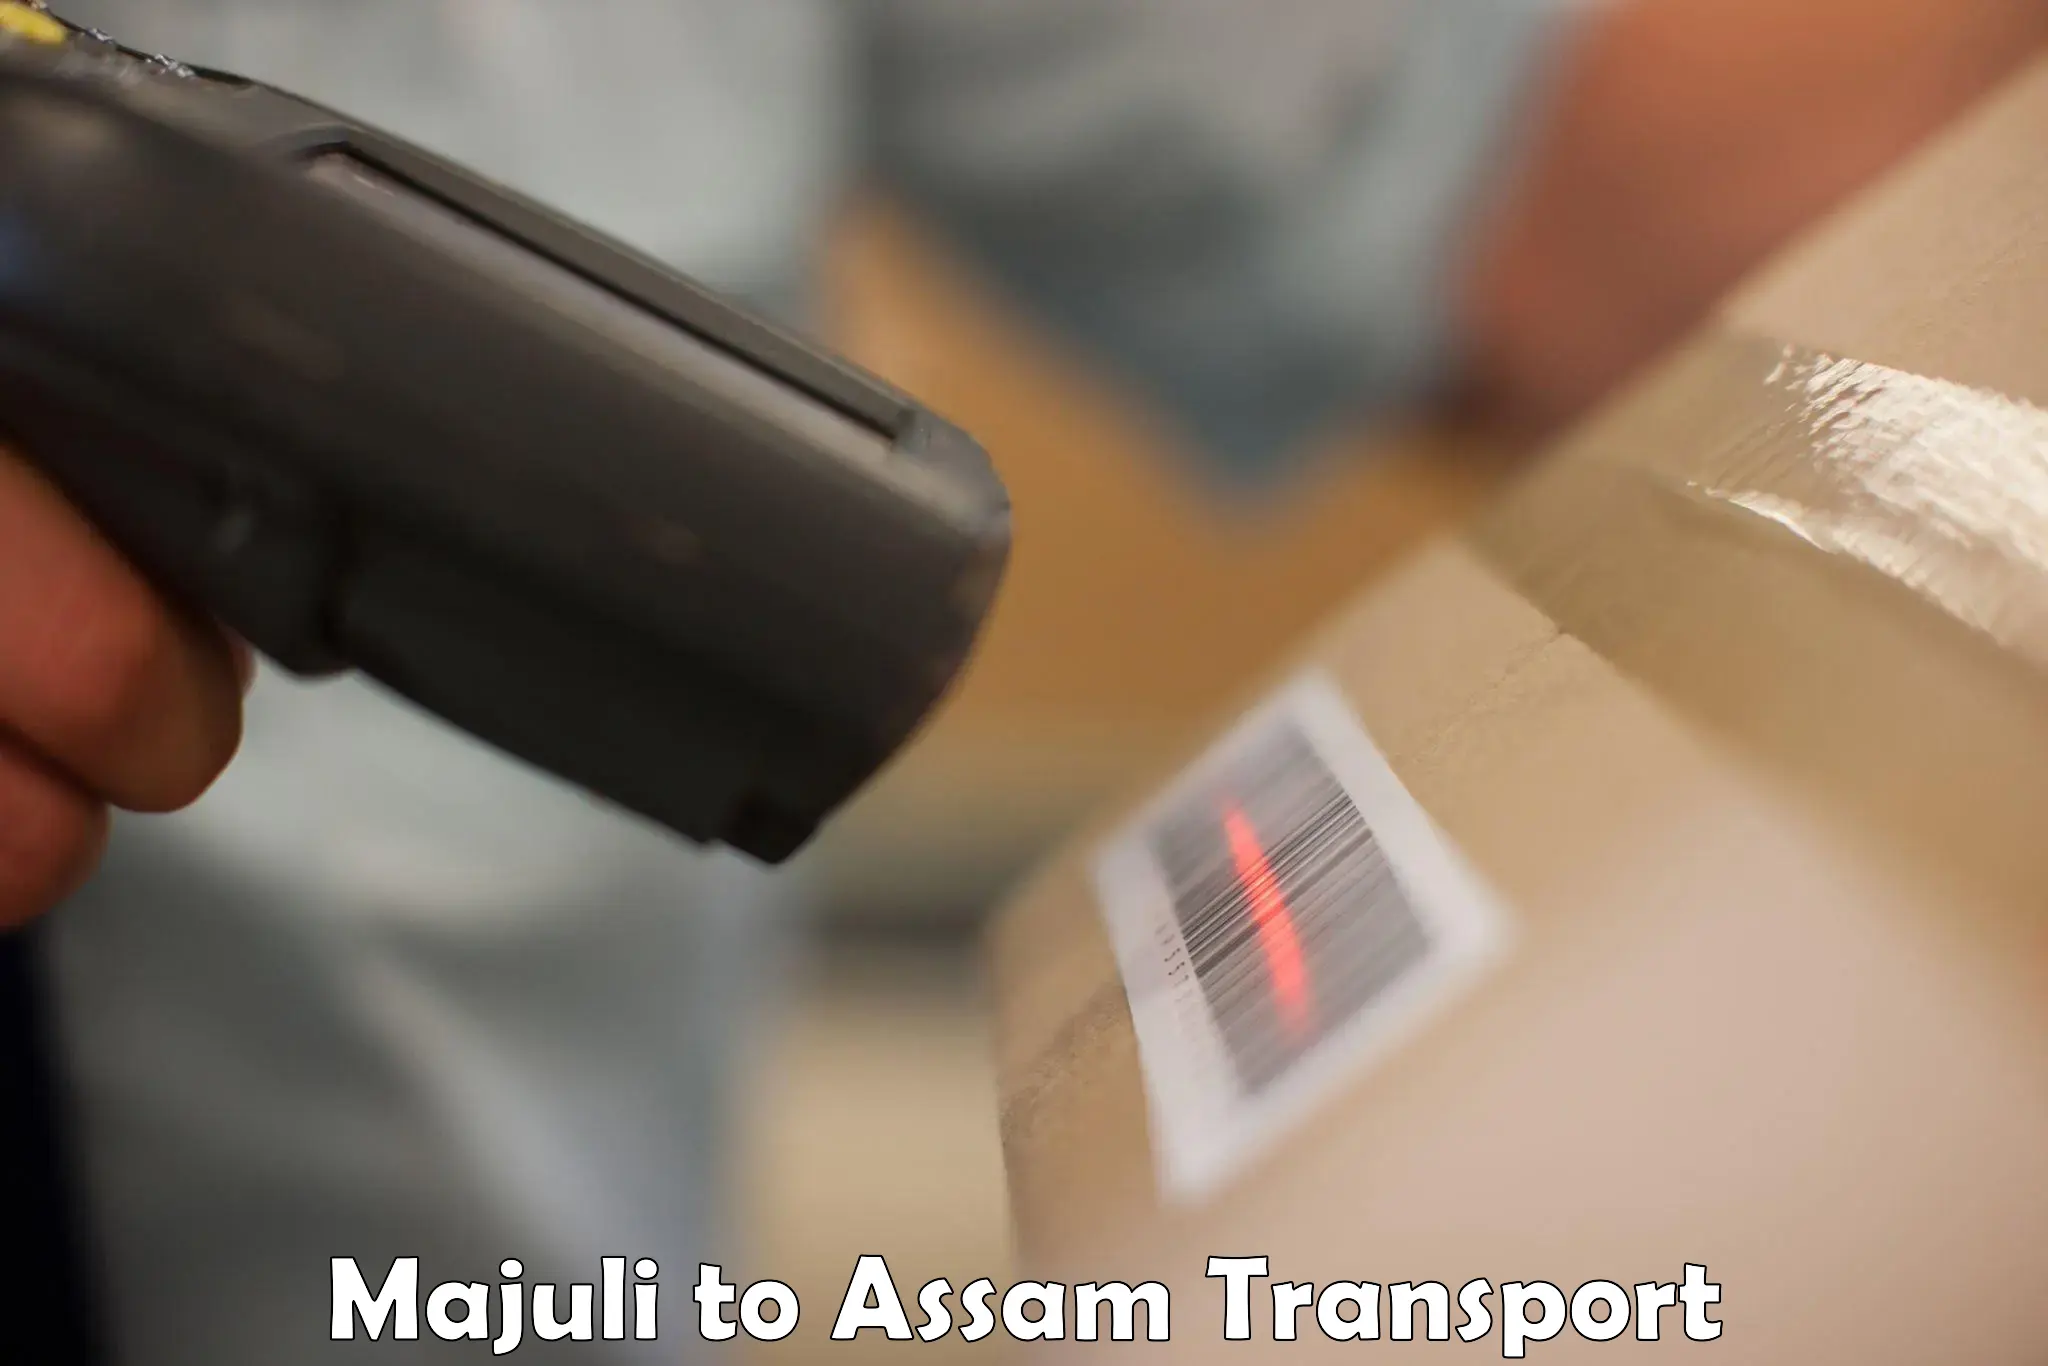 Transport bike from one state to another Majuli to Assam